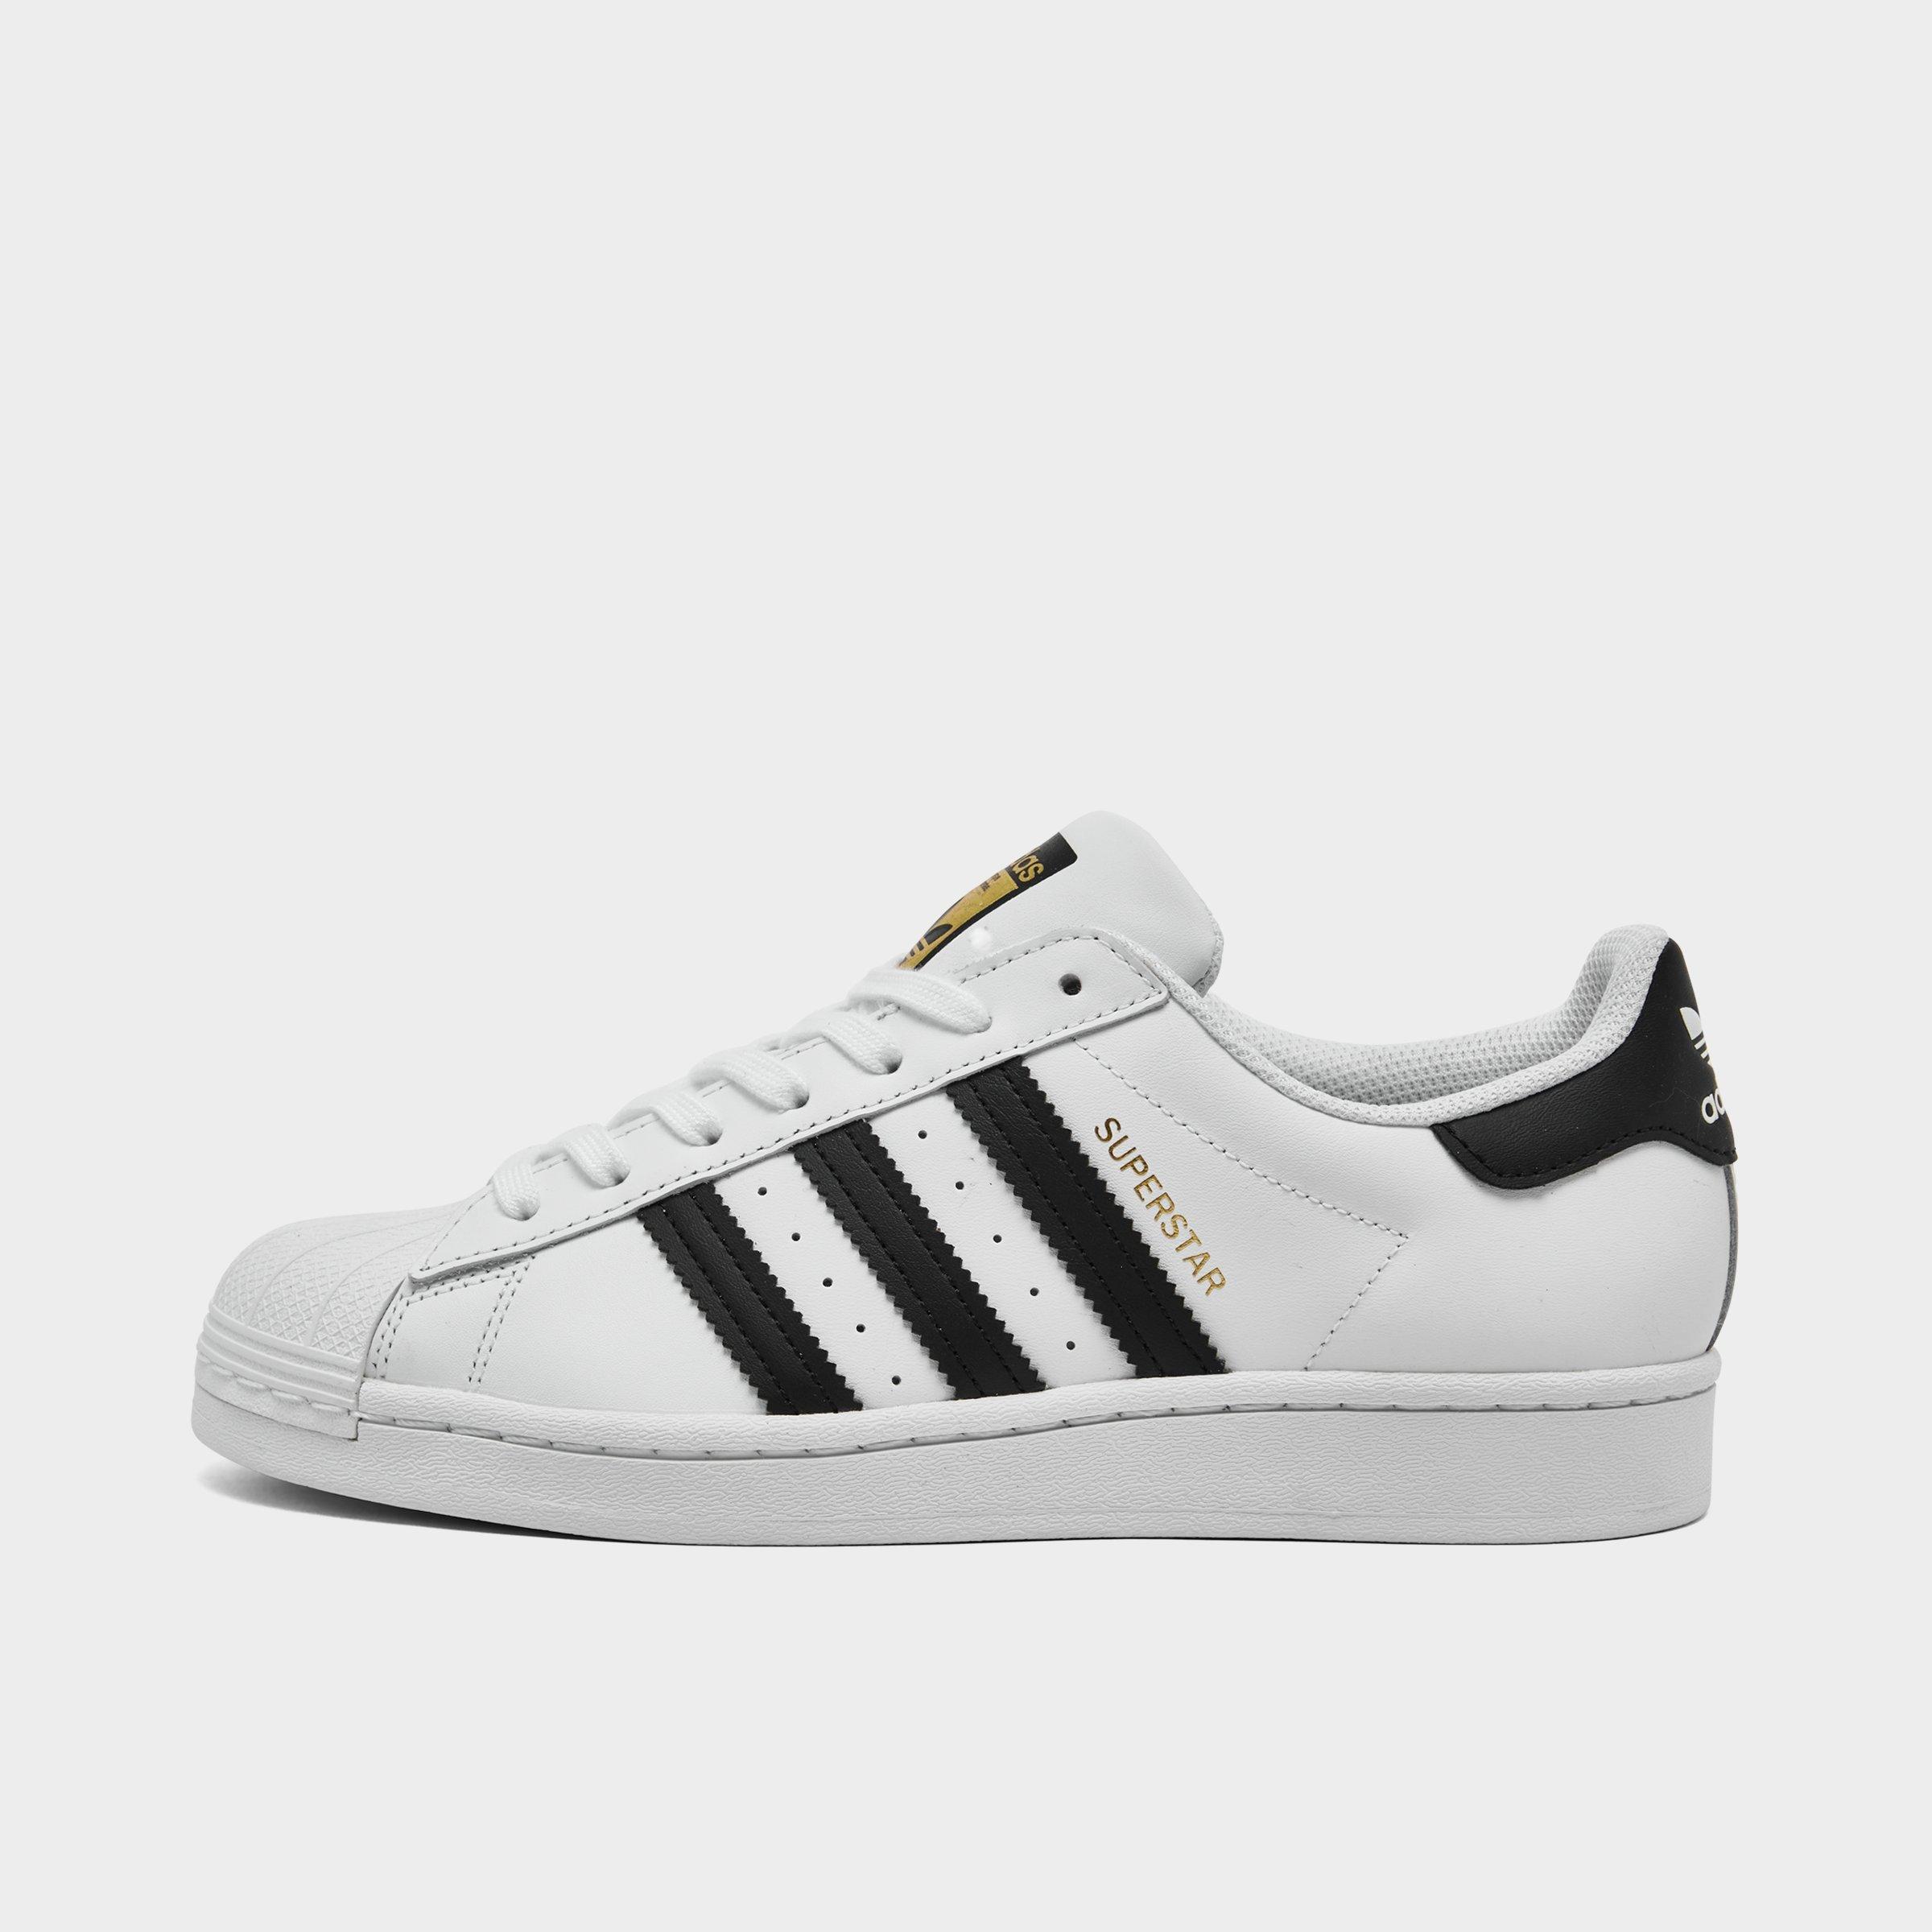 adidas superstar womens size 6 black and white